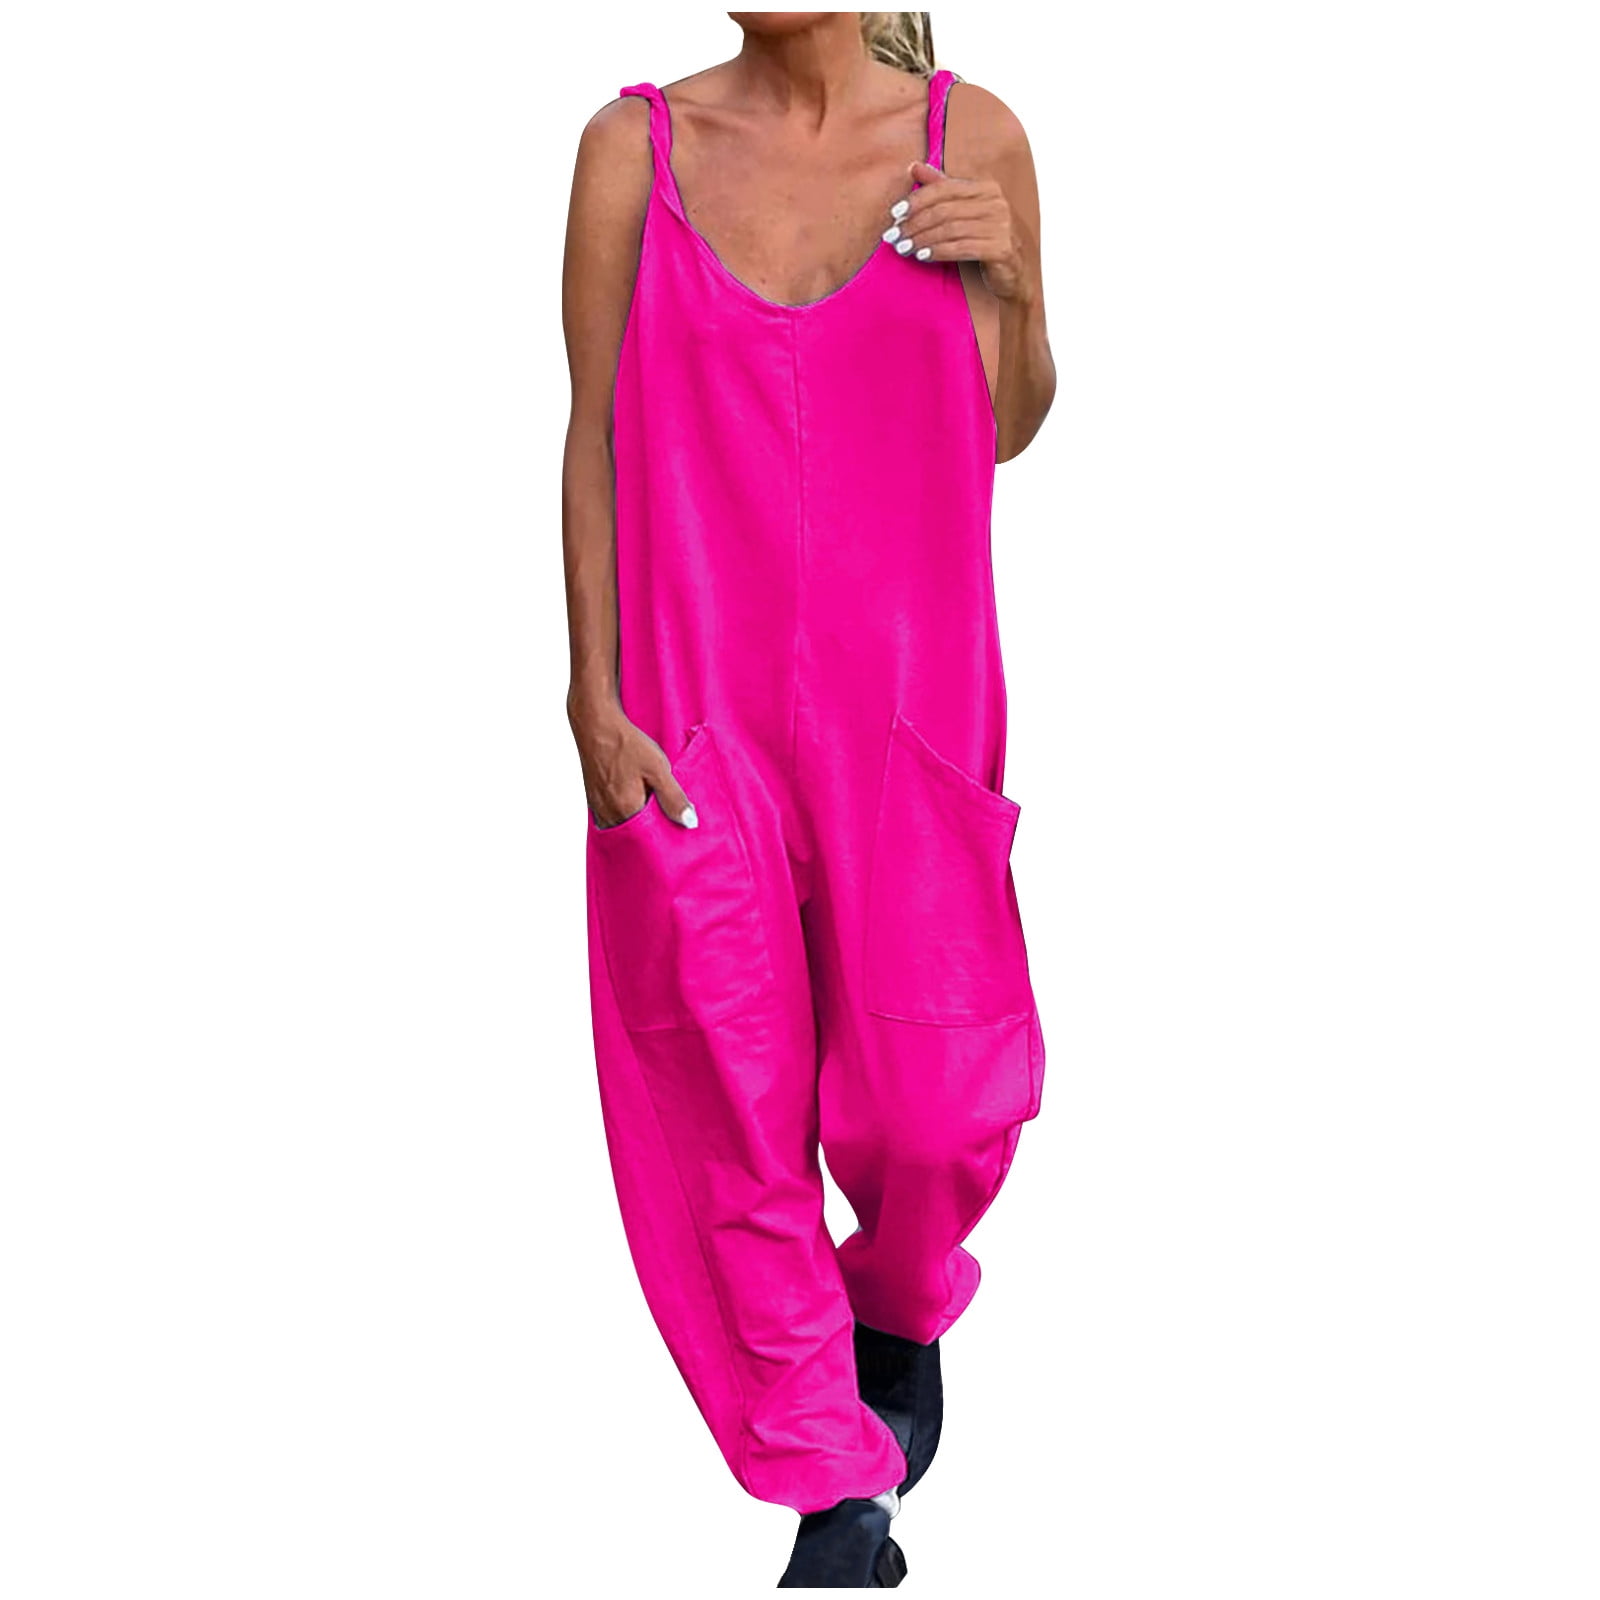 AIEOTT Jumpsuits for Women Clearance,Rompers for Women,Women's